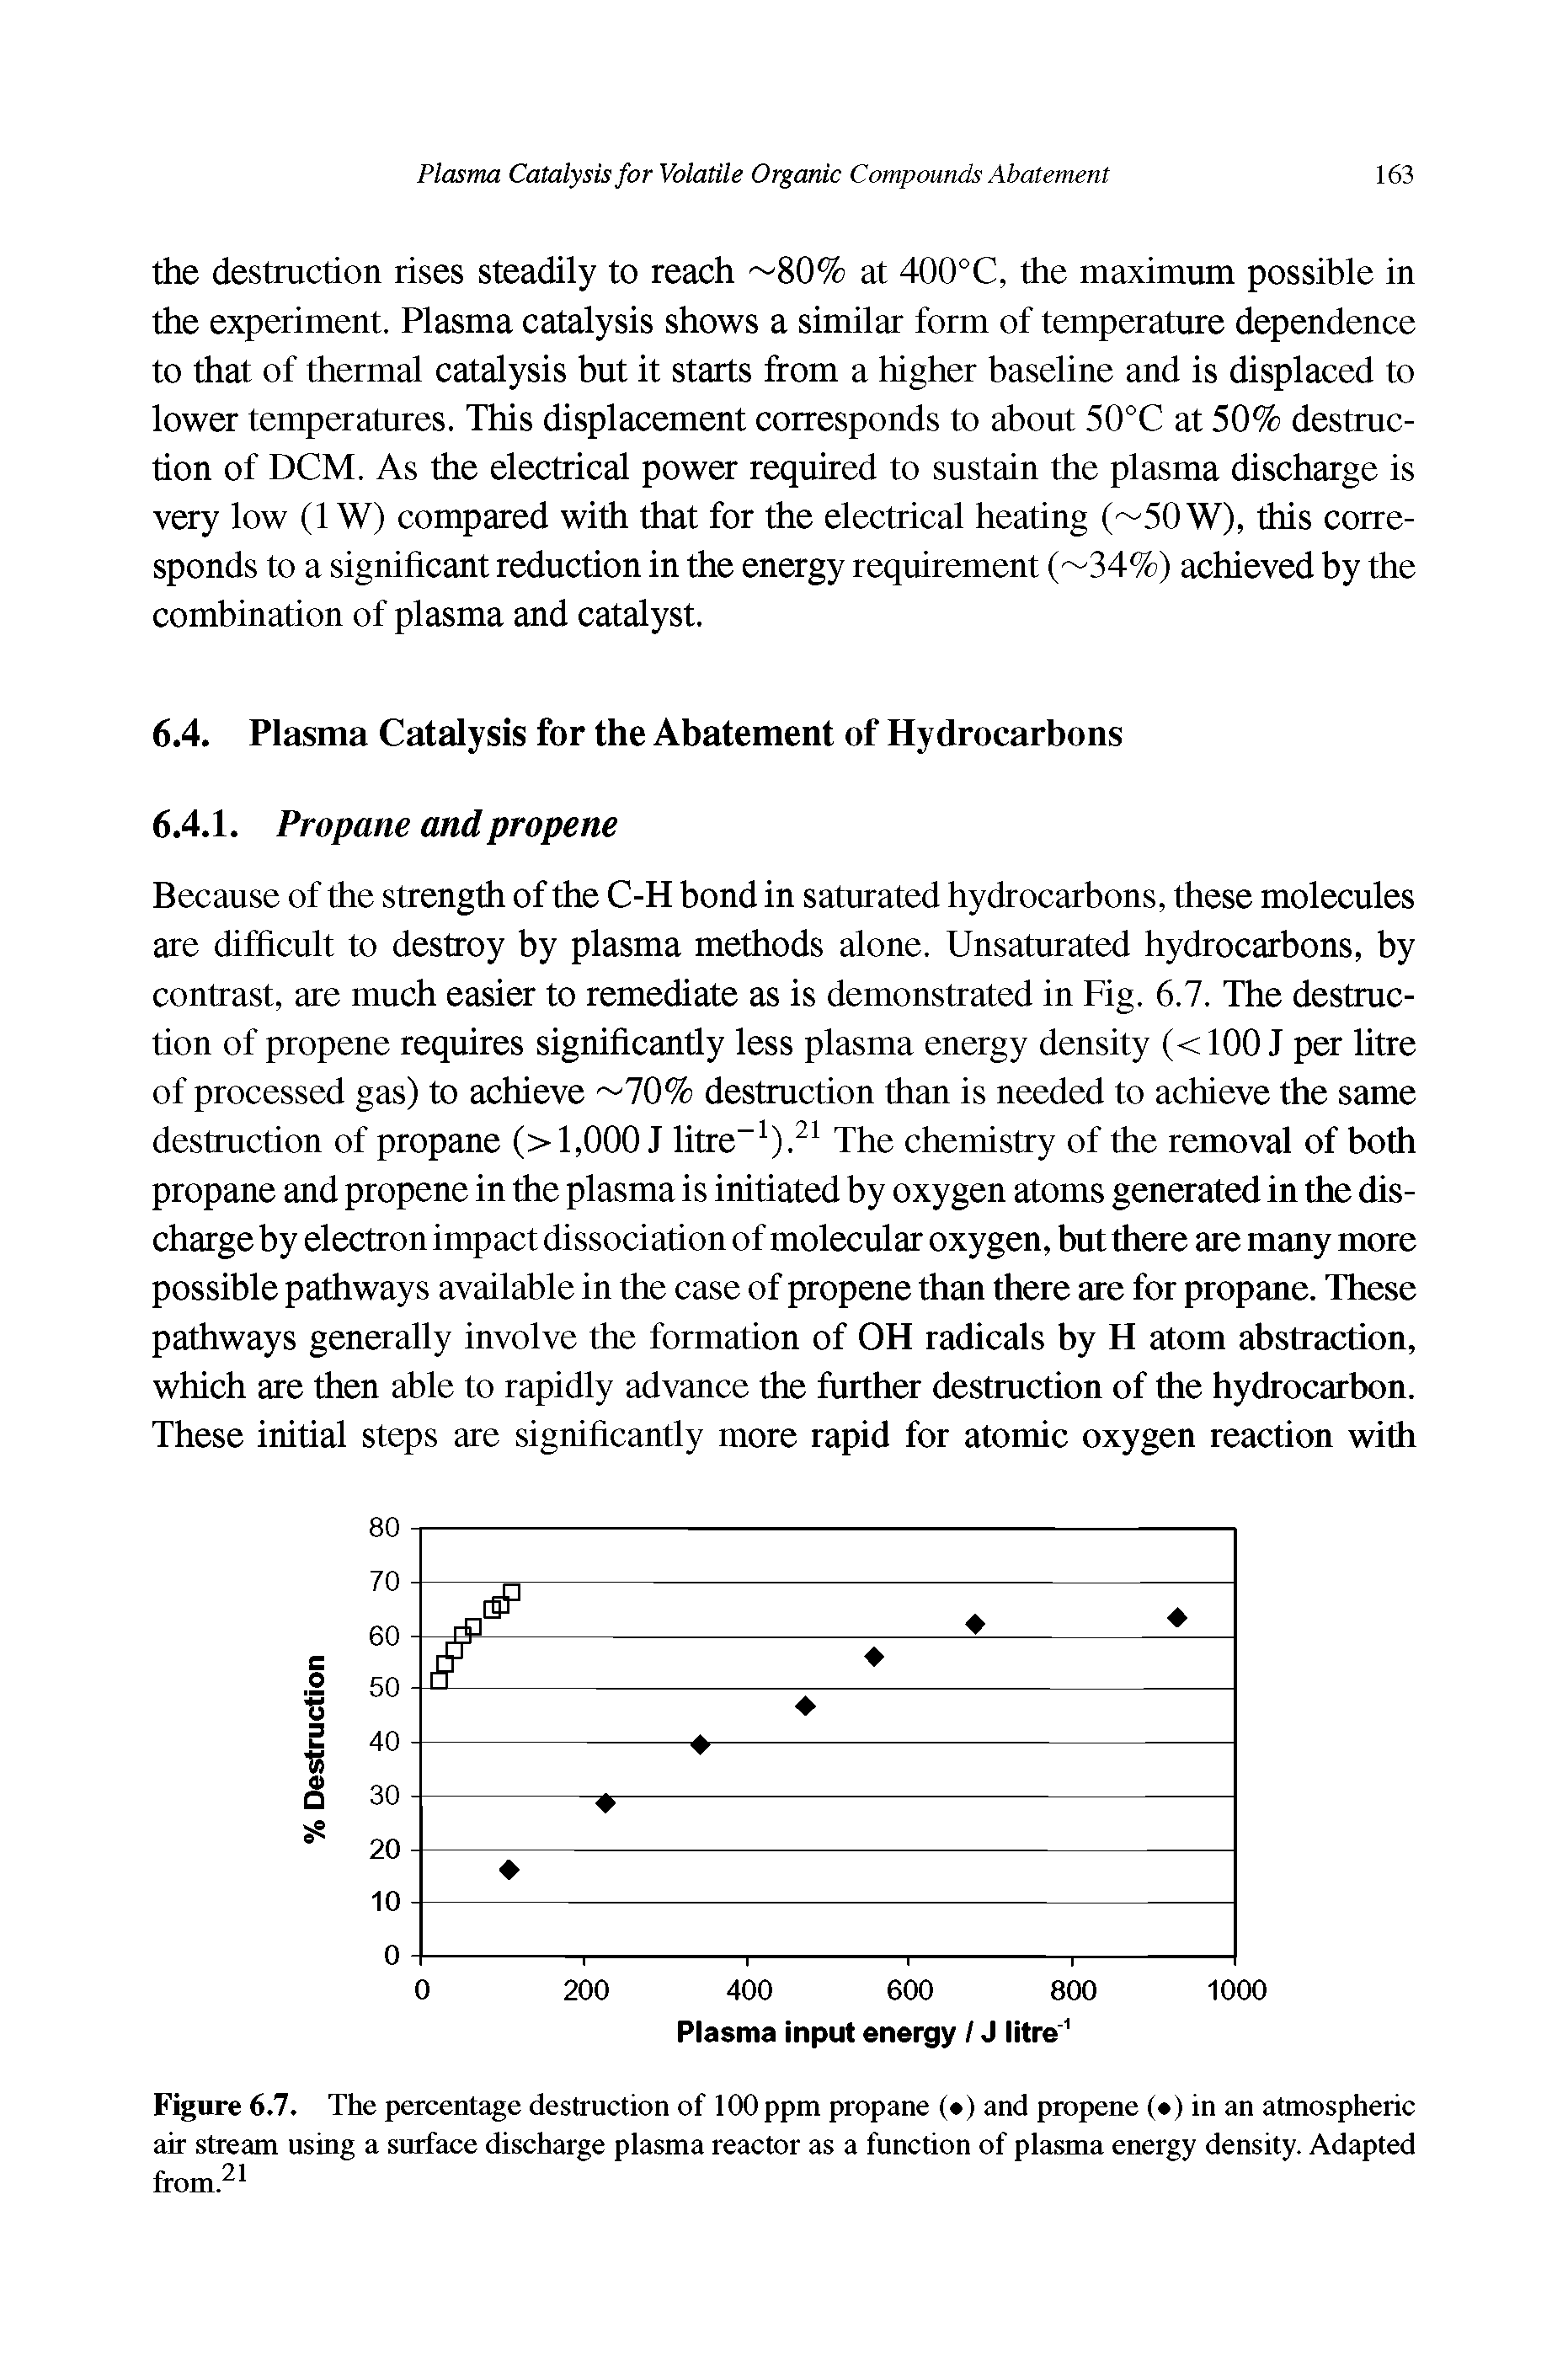 Figure 6.7. The percentage destruction of 100 ppm propane ( ) and propene ( ) in an atmospheric air stream using a surface discharge plasma reactor as a function of plasma energy density. Adapted from. ...